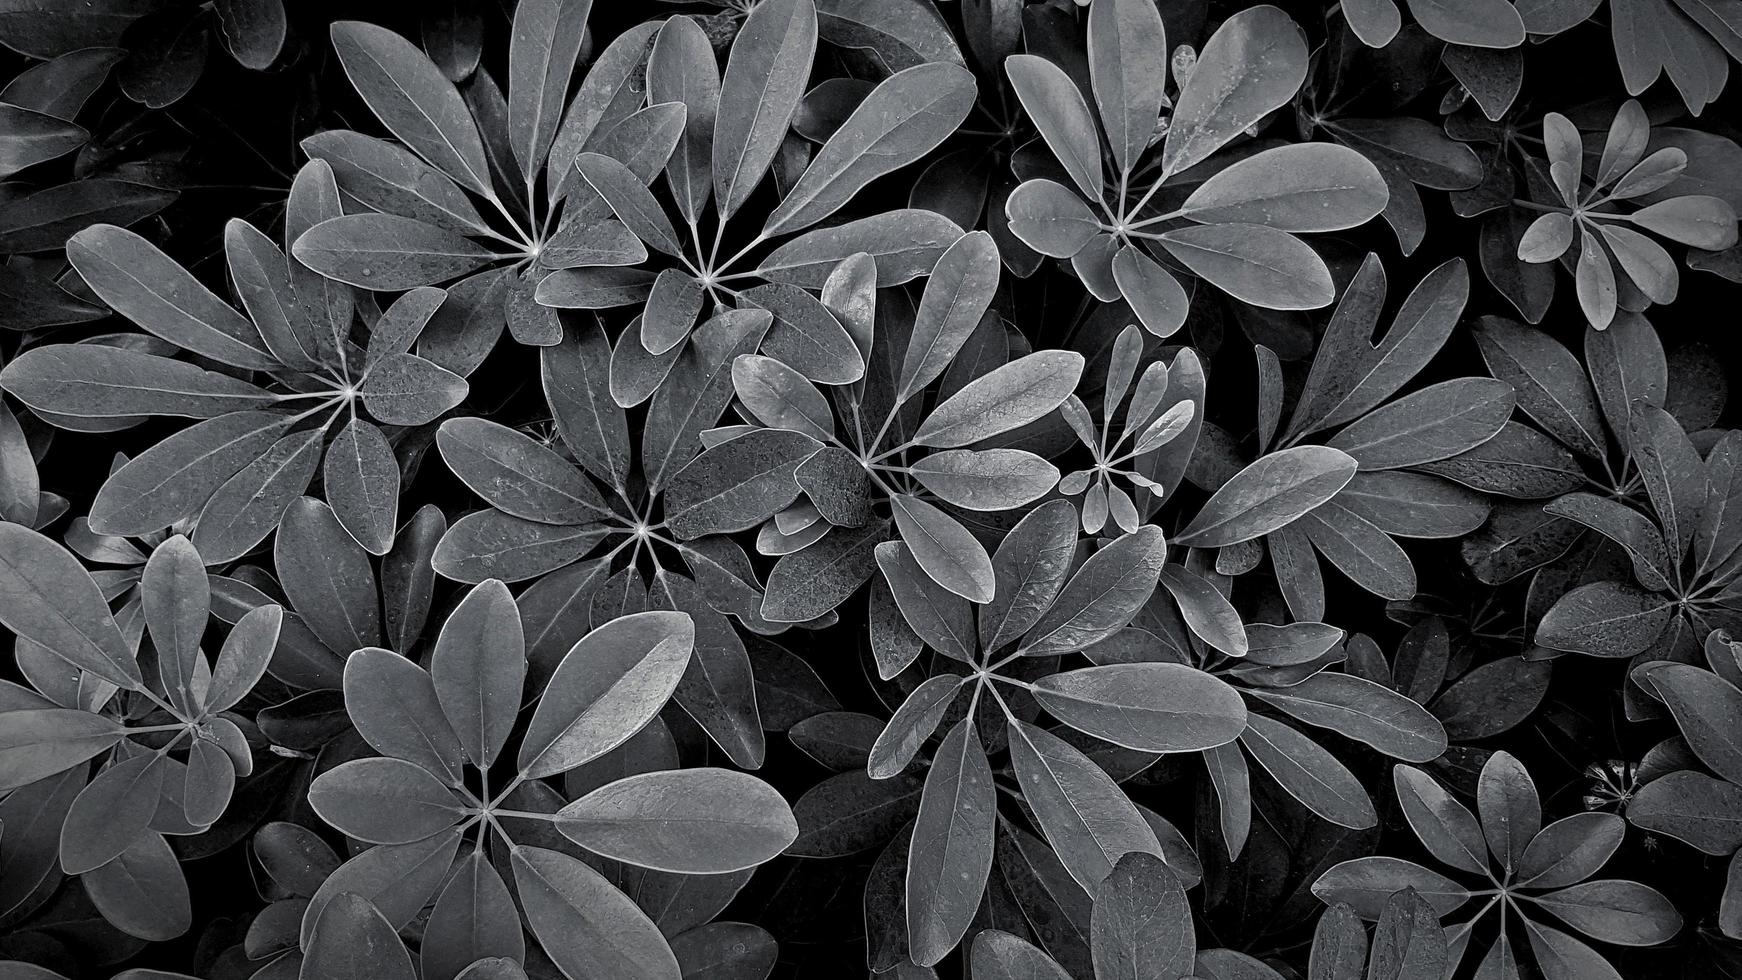 Beautiful leaves pattern for background at garden park in black and white or monochrome tone. Beauty of Nature, Growth, Plant and Natural wallpaper concept photo